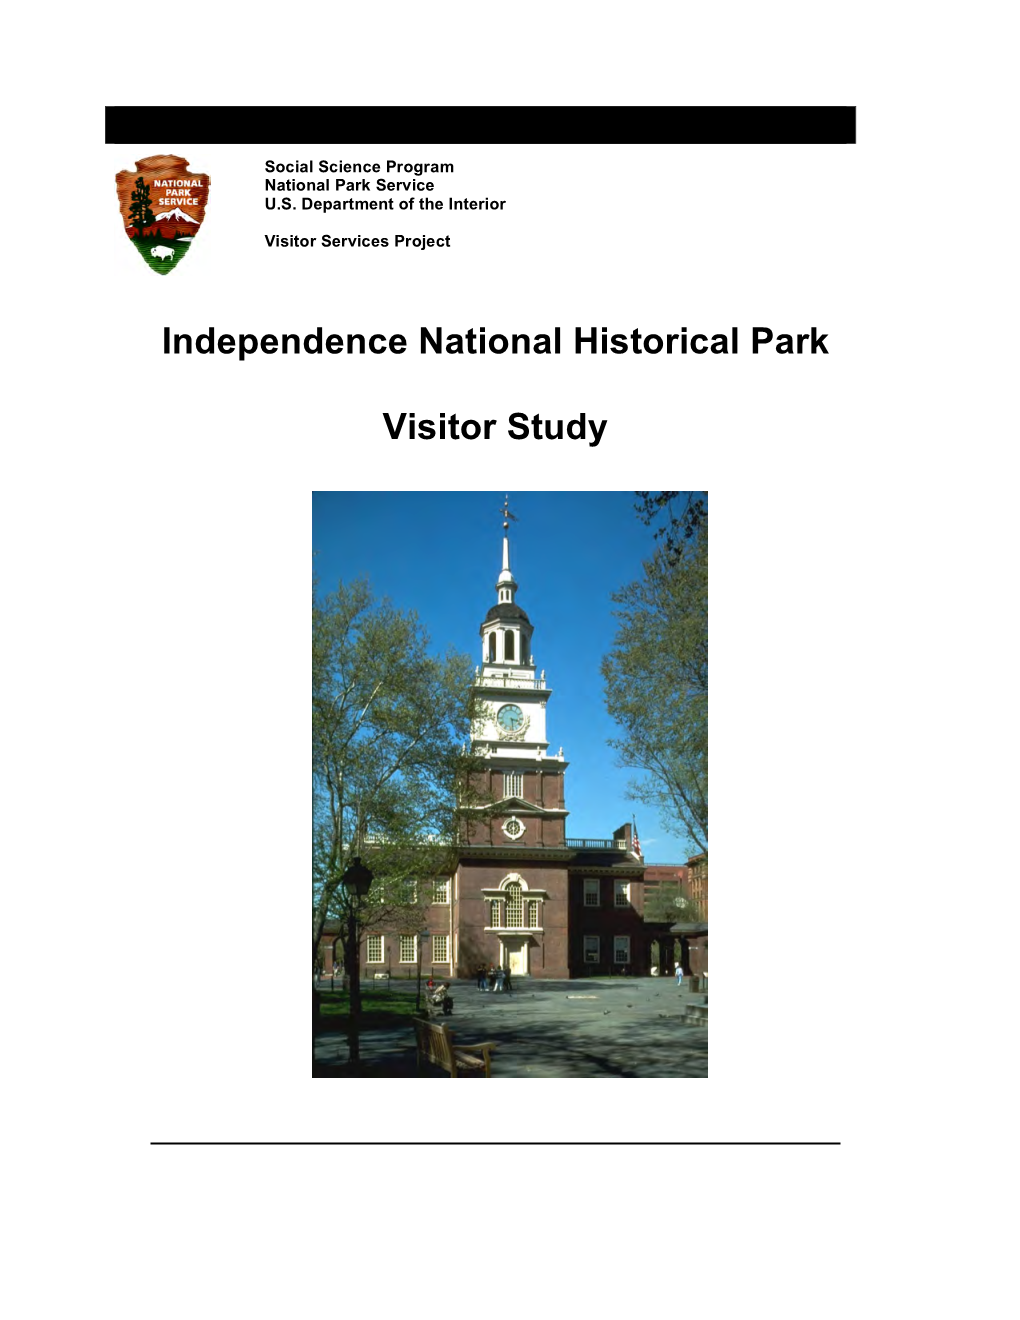 Independence National Historical Park Visitor Study